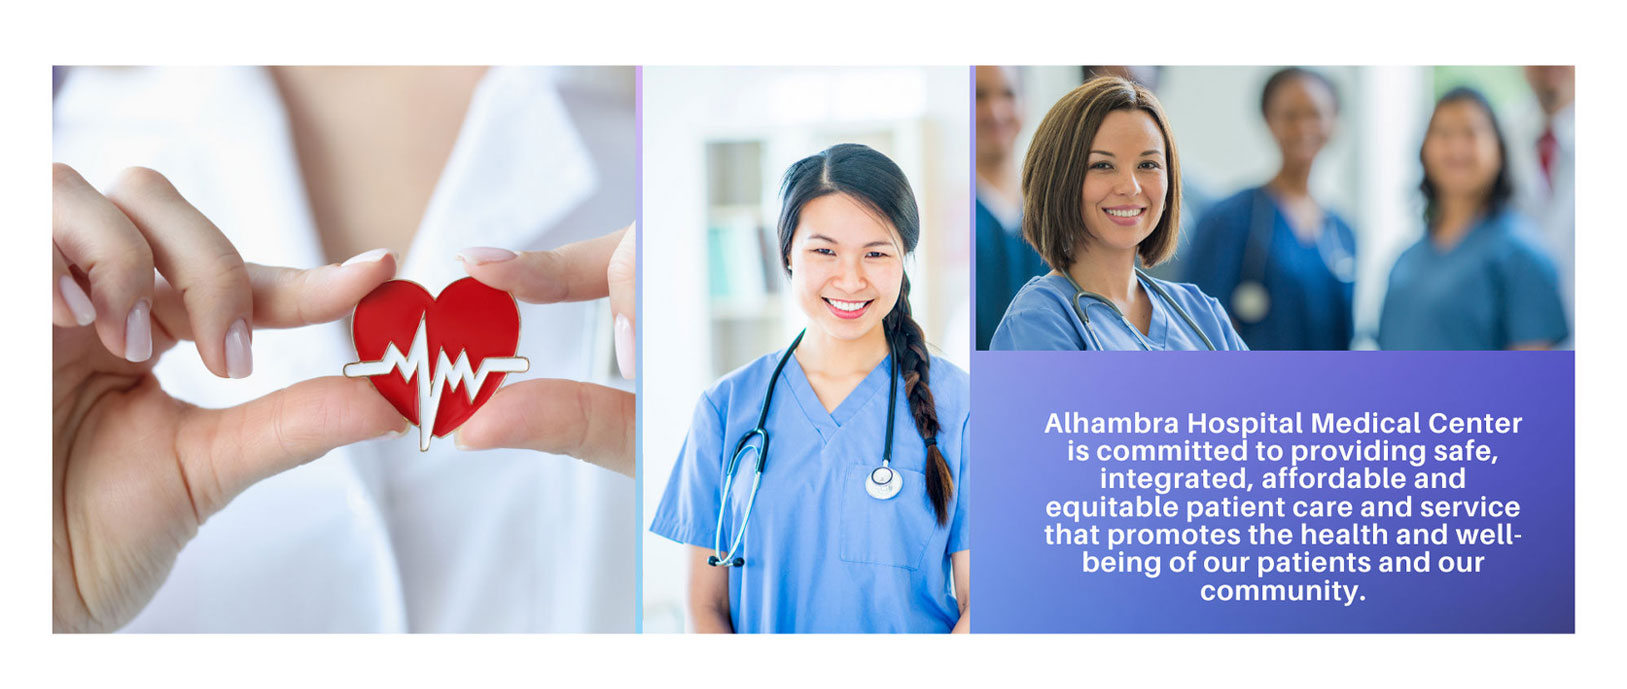 AHMC is committed to providing safe, integrated, affordable patient care and service that promotes the health and well-being of our patients and our community.